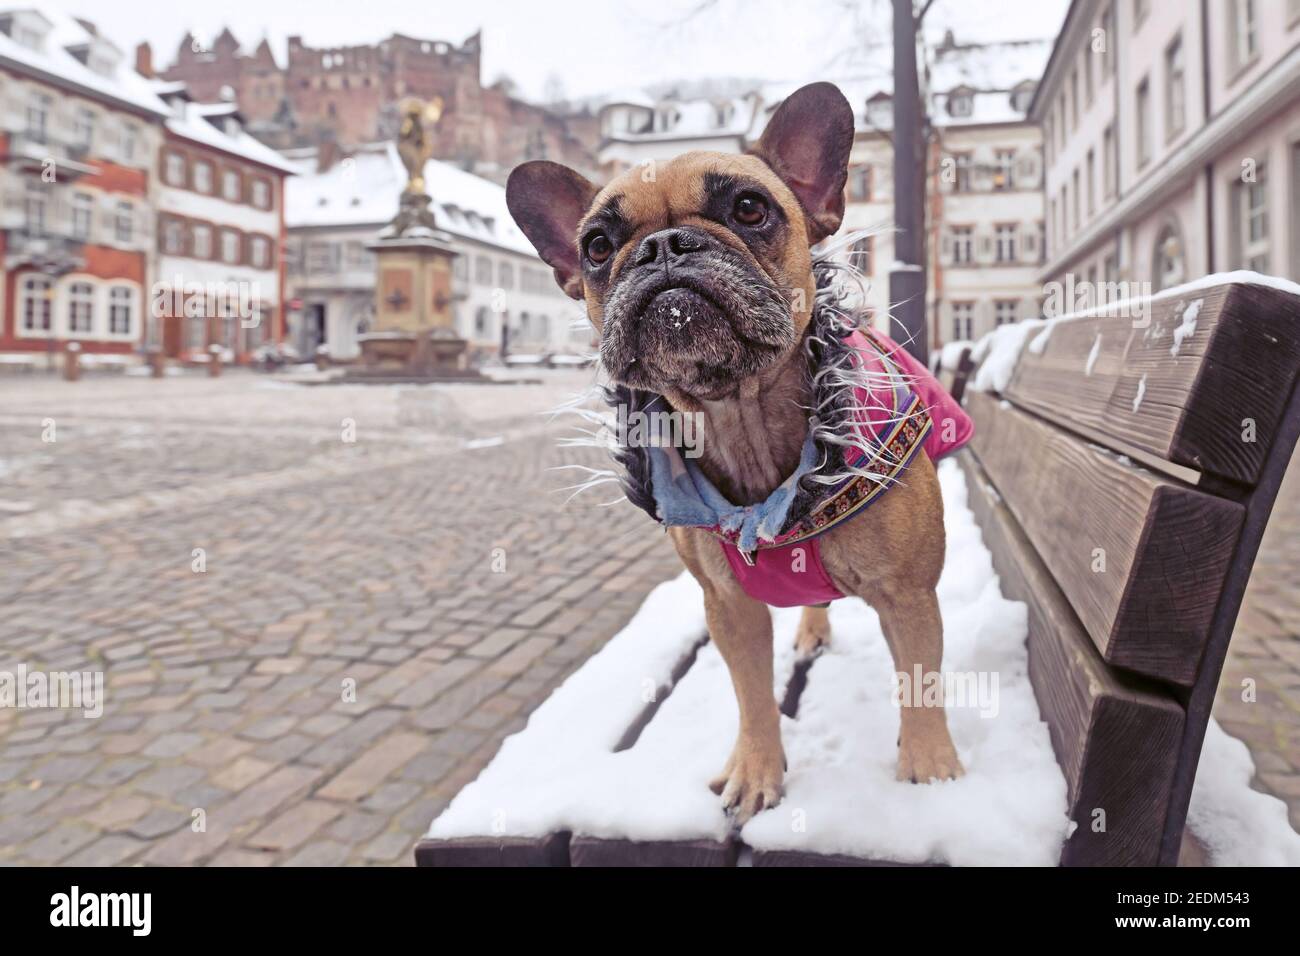 French Bulldog dog wearing warm pink winter coat with fur collar standing on snow covered bench in town square with old historic buildings Stock Photo